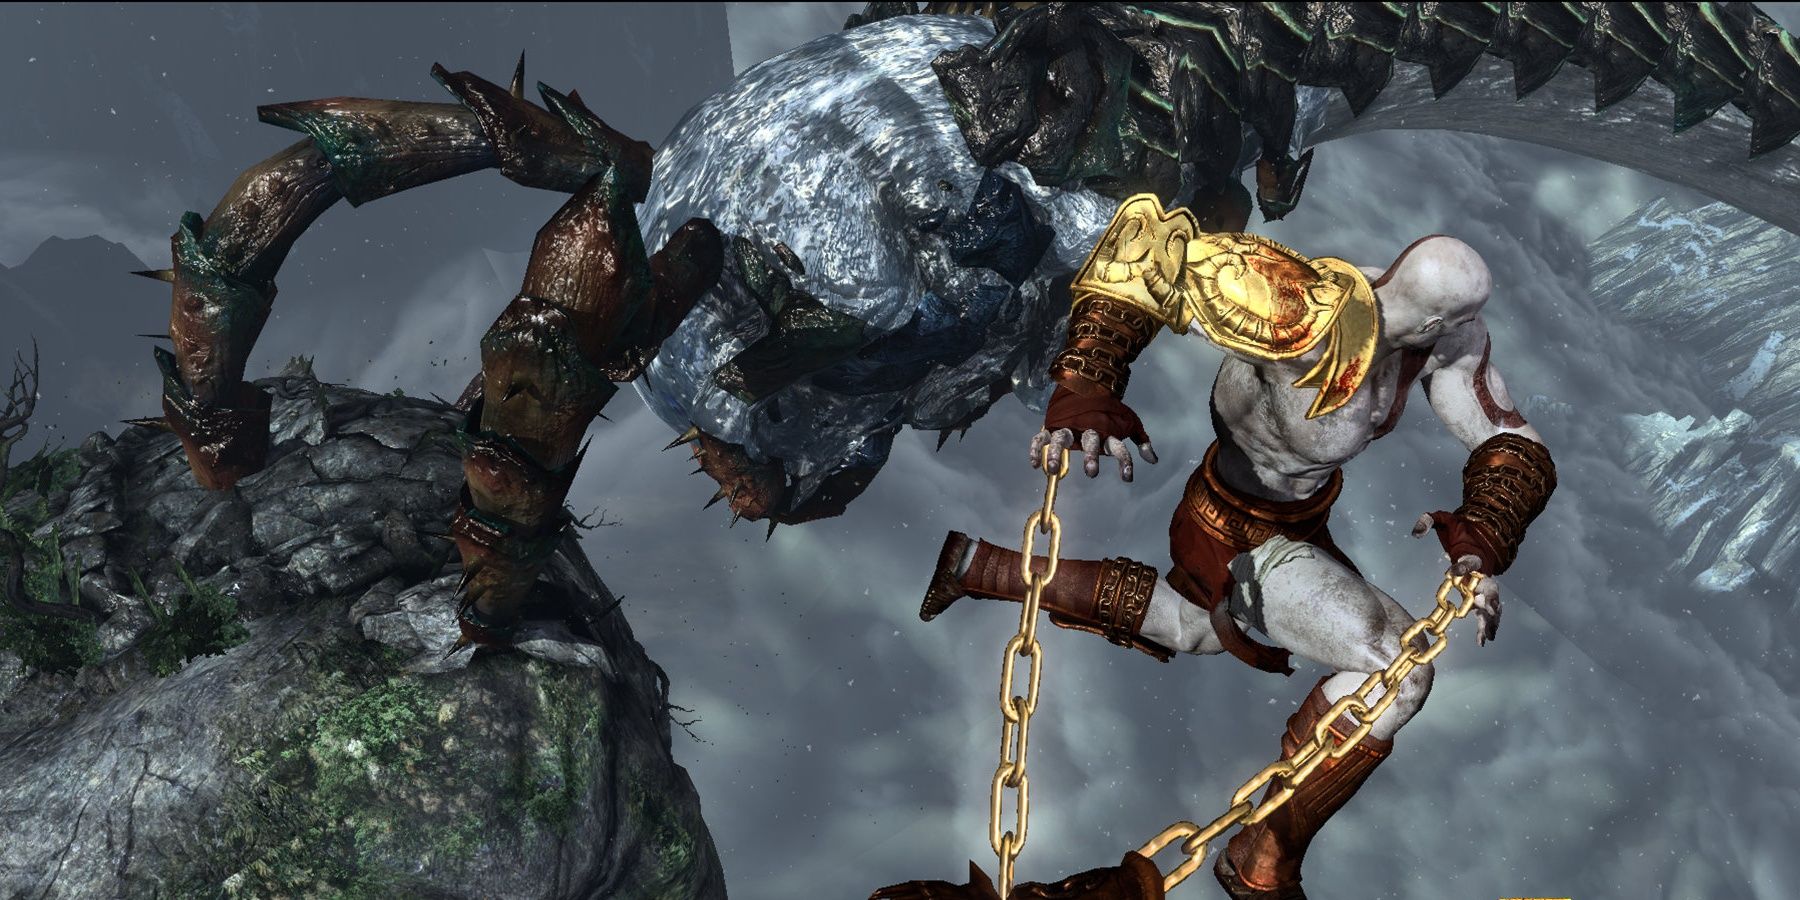 Kratos trying to separate Poseidon from Gaia in God of War III